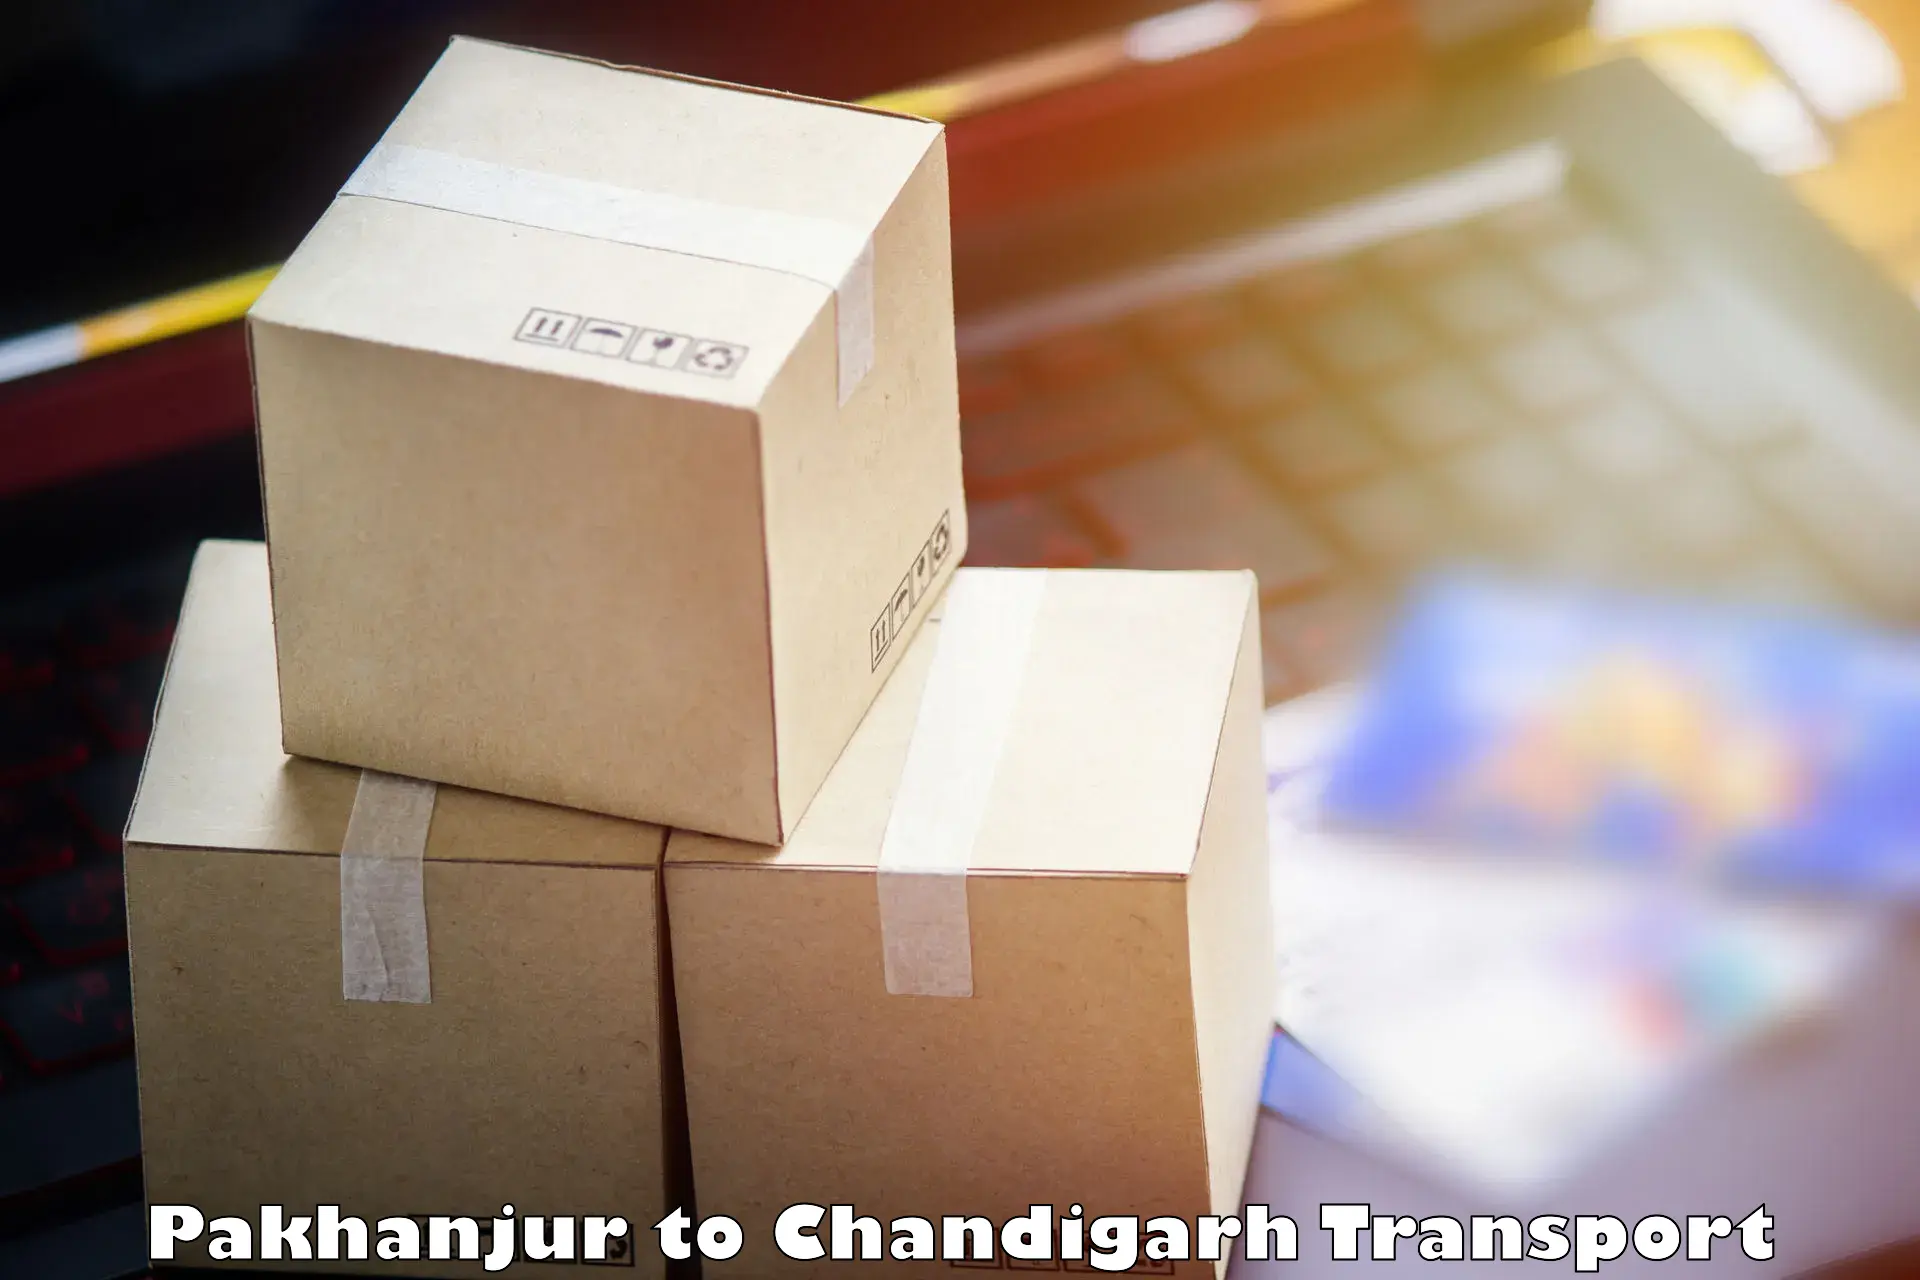 Transport shared services Pakhanjur to Chandigarh